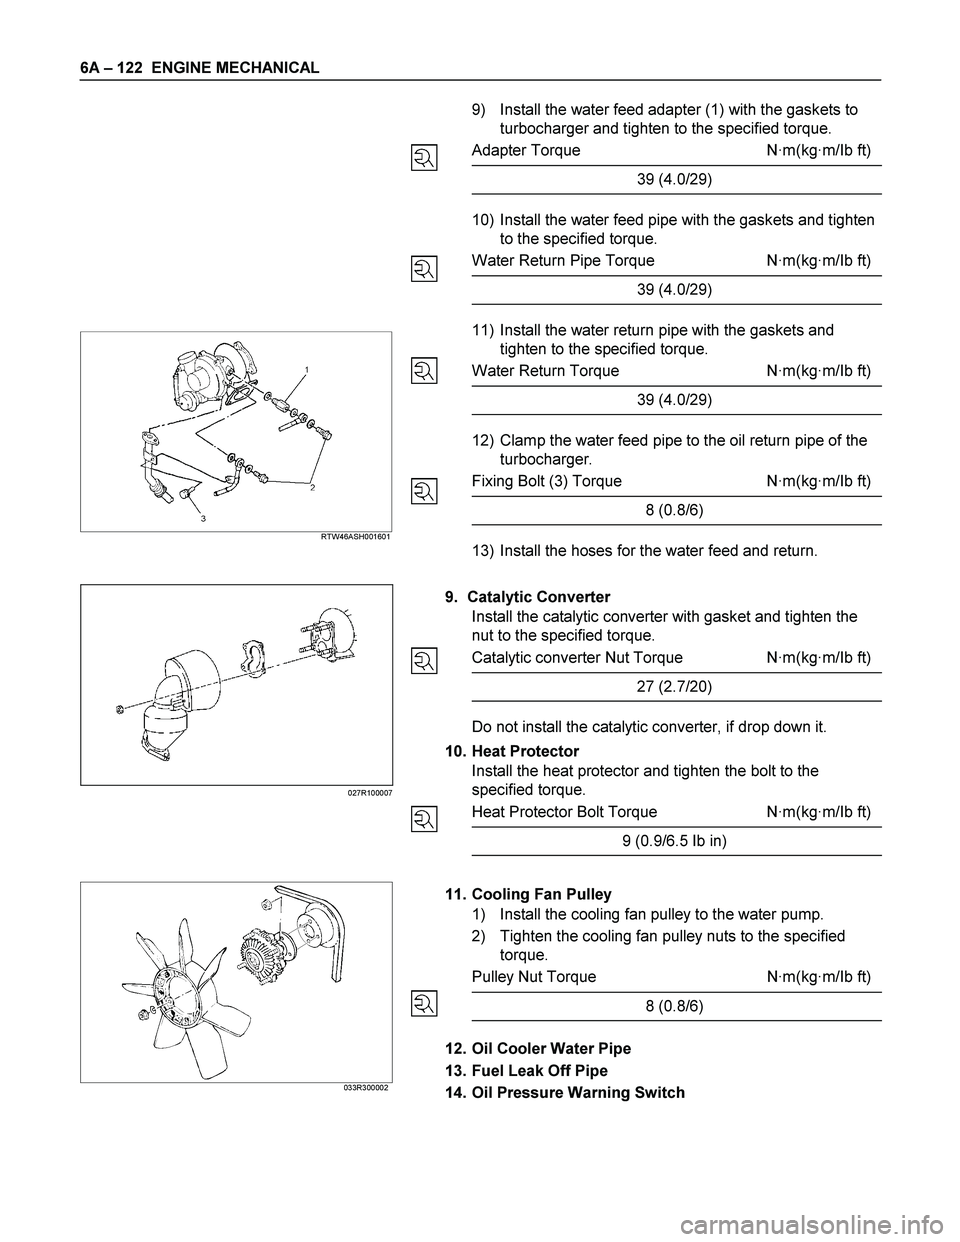 ISUZU TF SERIES 2004  Workshop Manual 6A – 122  ENGINE MECHANICAL 
 
 
 
 
 
 
 
 
 
 
 
 
 
 
 
 
 
 RTW46ASH001601  
 
 
 
 
 
 
 
 
 
 
 
 
 
 
 
 
 
 
 
 
 
 
 
 
 
 
 
 
 
 
 
9)  Install the water feed adapter (1) with the gaskets